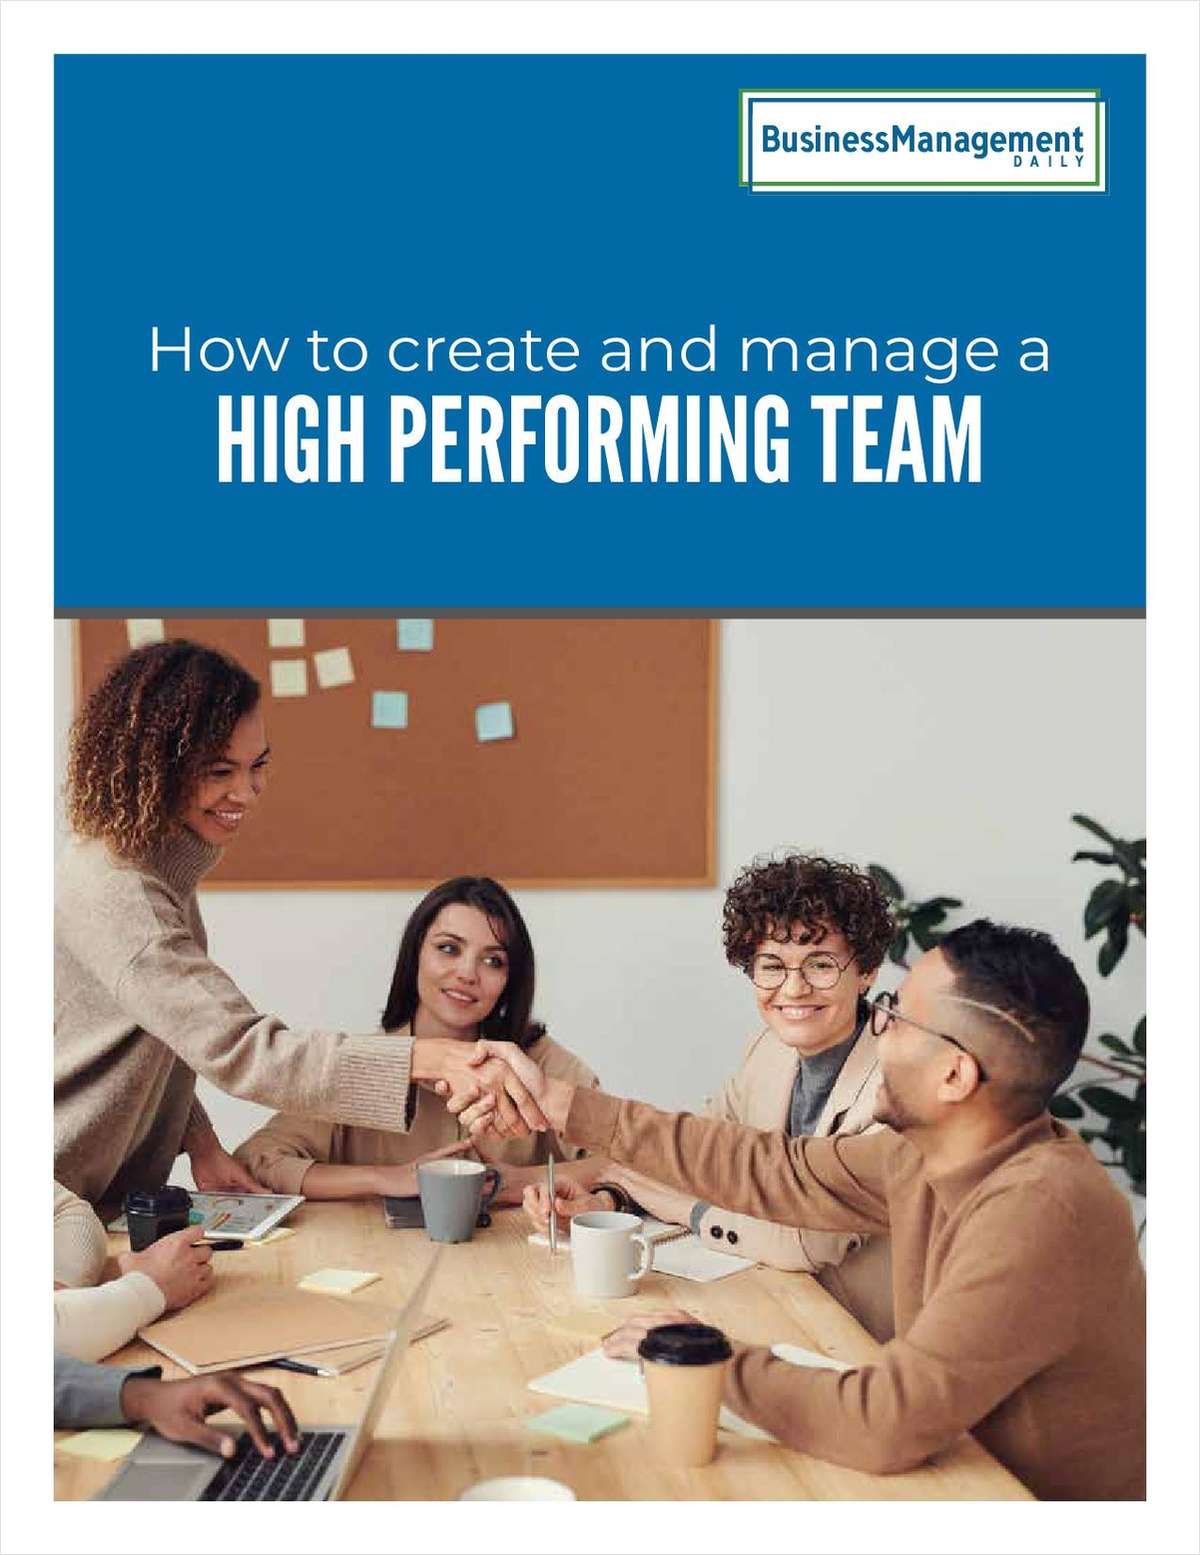 How to create and manage a high performing team